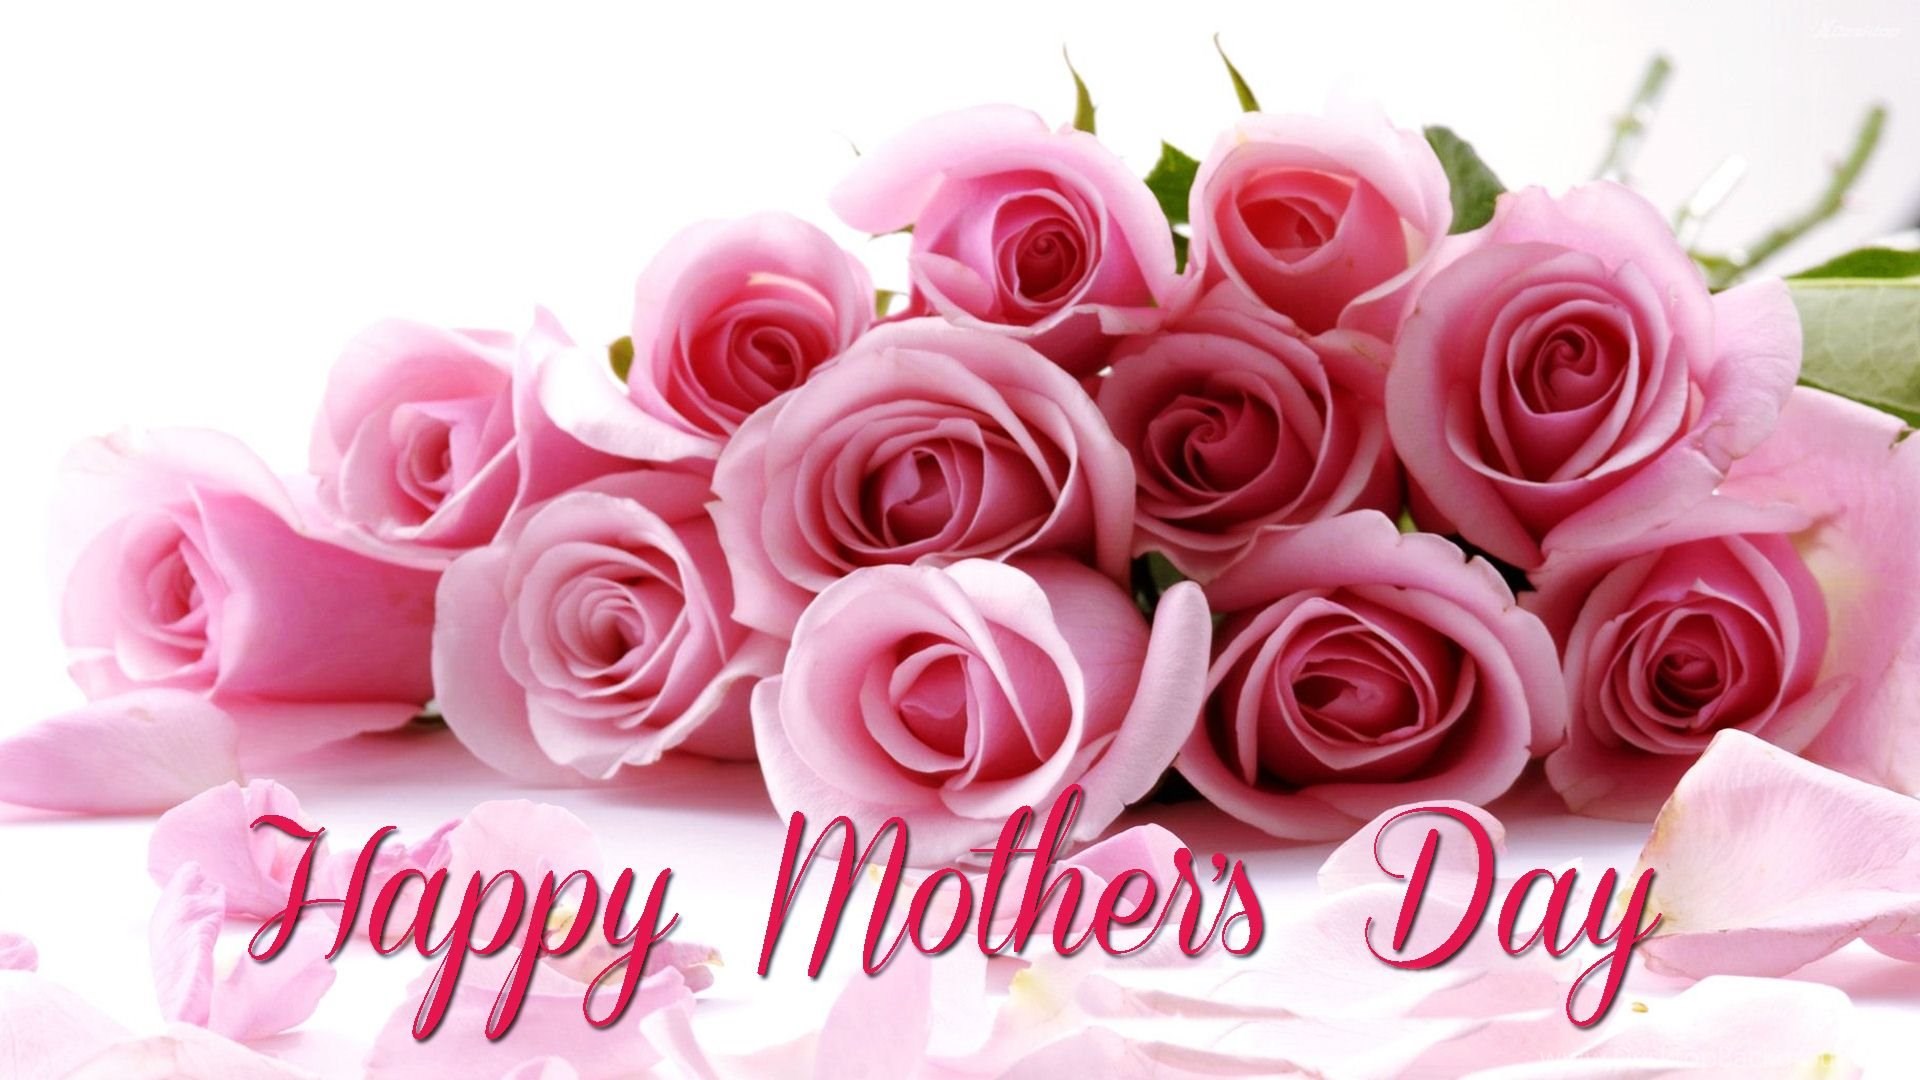 10 Happy Mothers Day Quotes Messages Wishes Greetings Saying Desktop